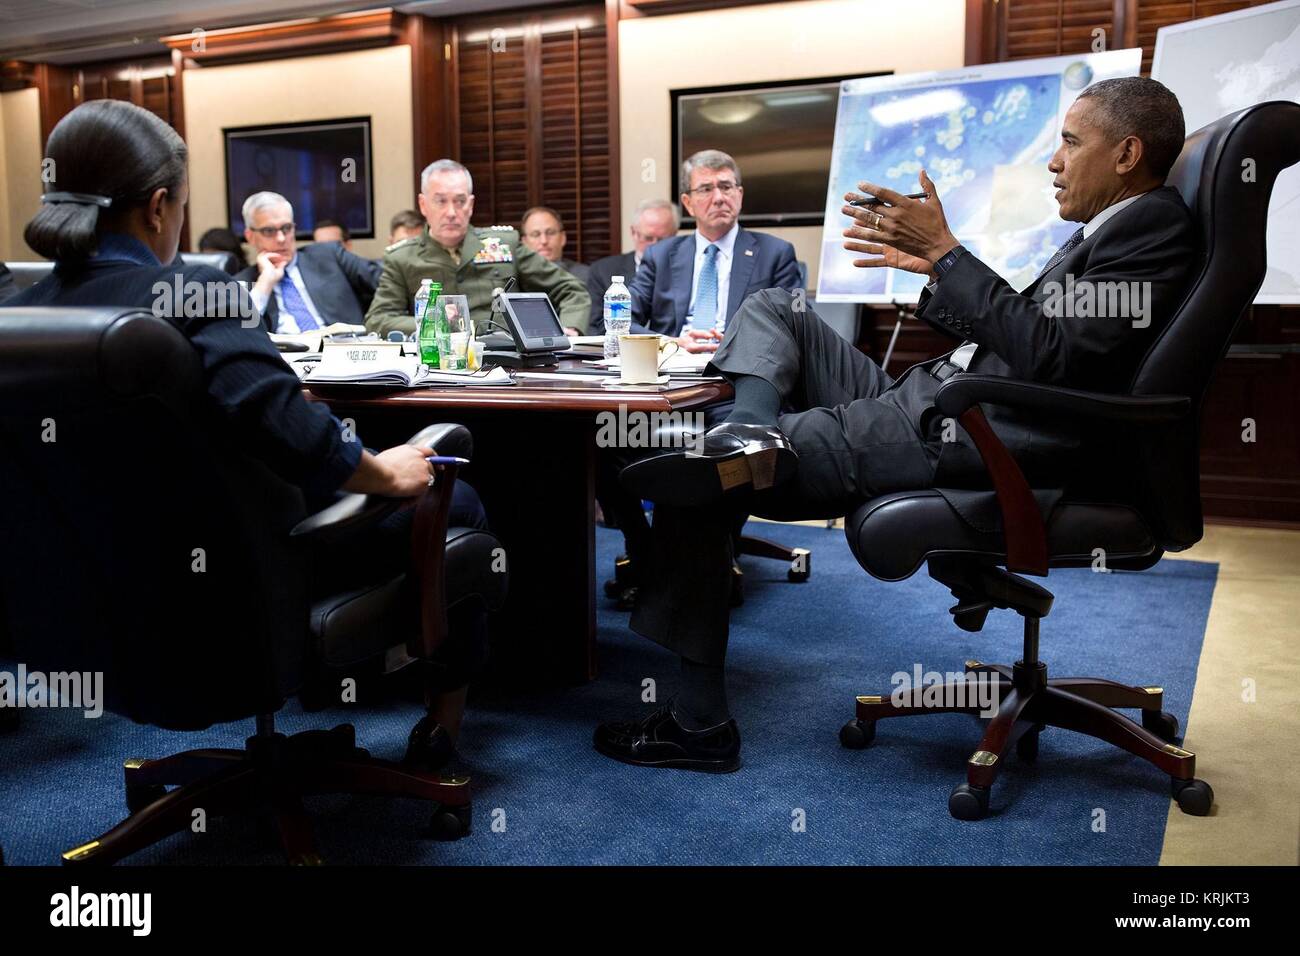 U.S. President Barack Obama meets with the National Security Council at the White House Situation Room March 18, 2016 in Washington, DC. Stock Photo